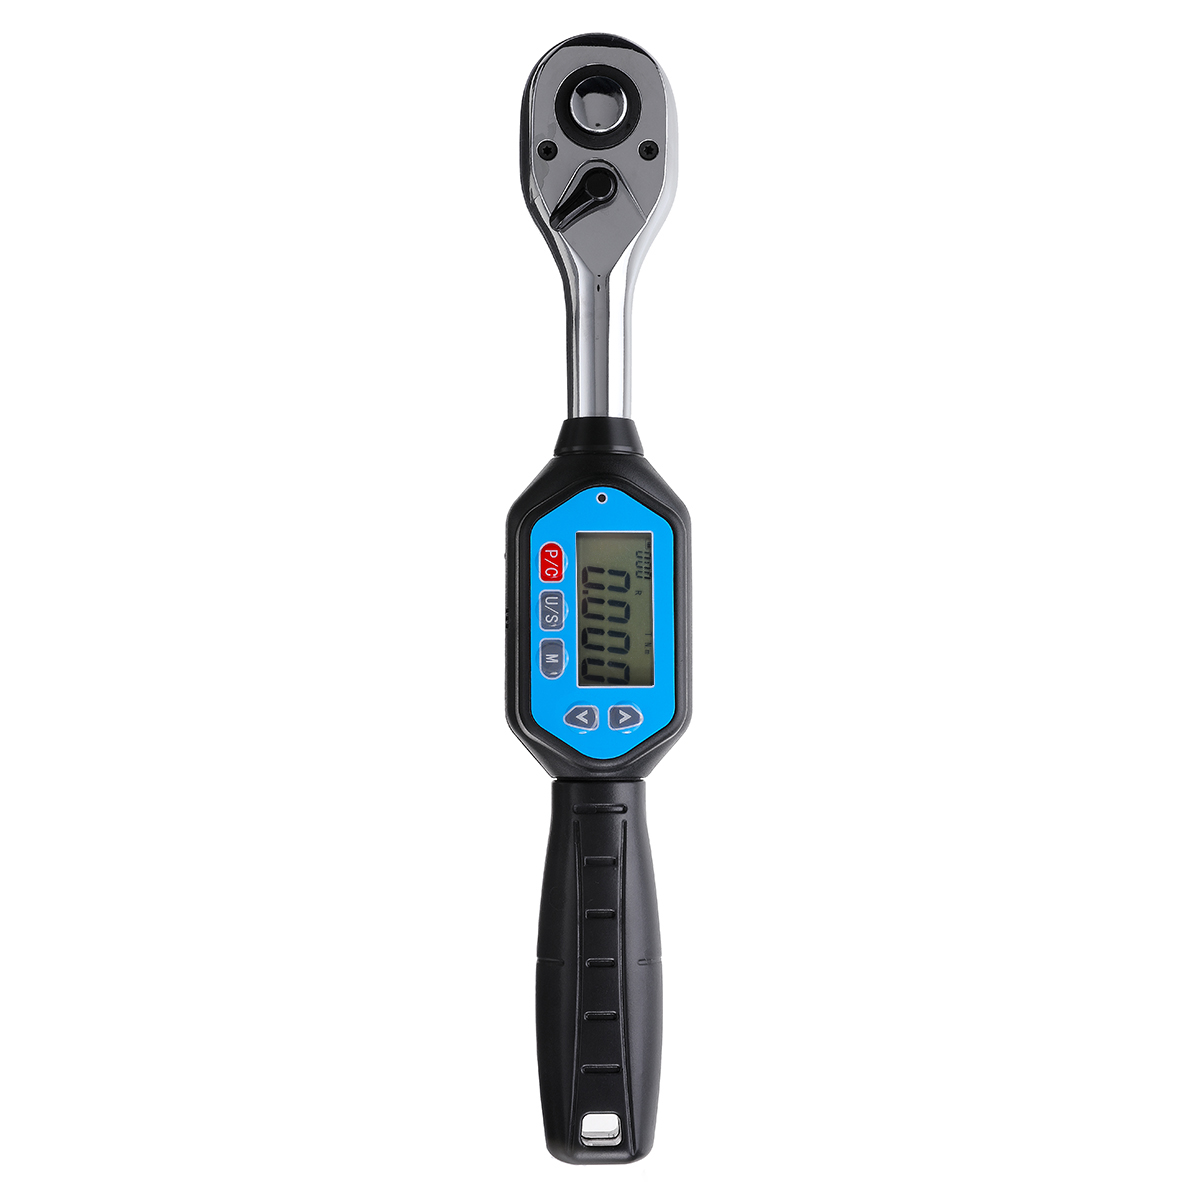 Drillpro-1PCS-Battery-free-Dual-purpose-Adjustable-Wrench-Auto-Repair-Bolt-Torque-Wrench-Mini-Electr-1907326-7